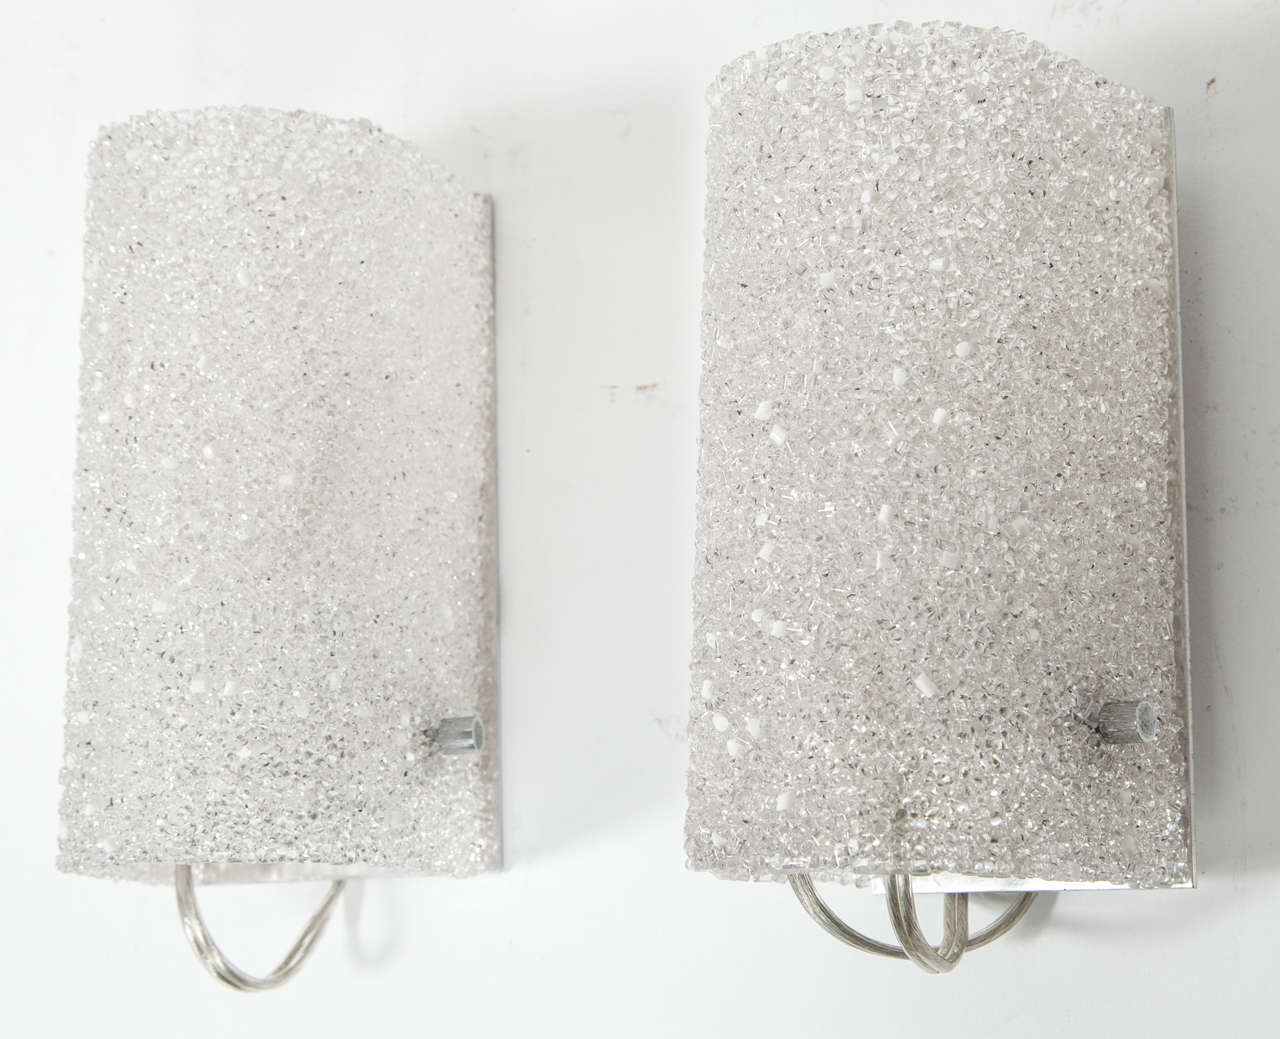 Pair of Beaded Sconces In Excellent Condition For Sale In New York, NY